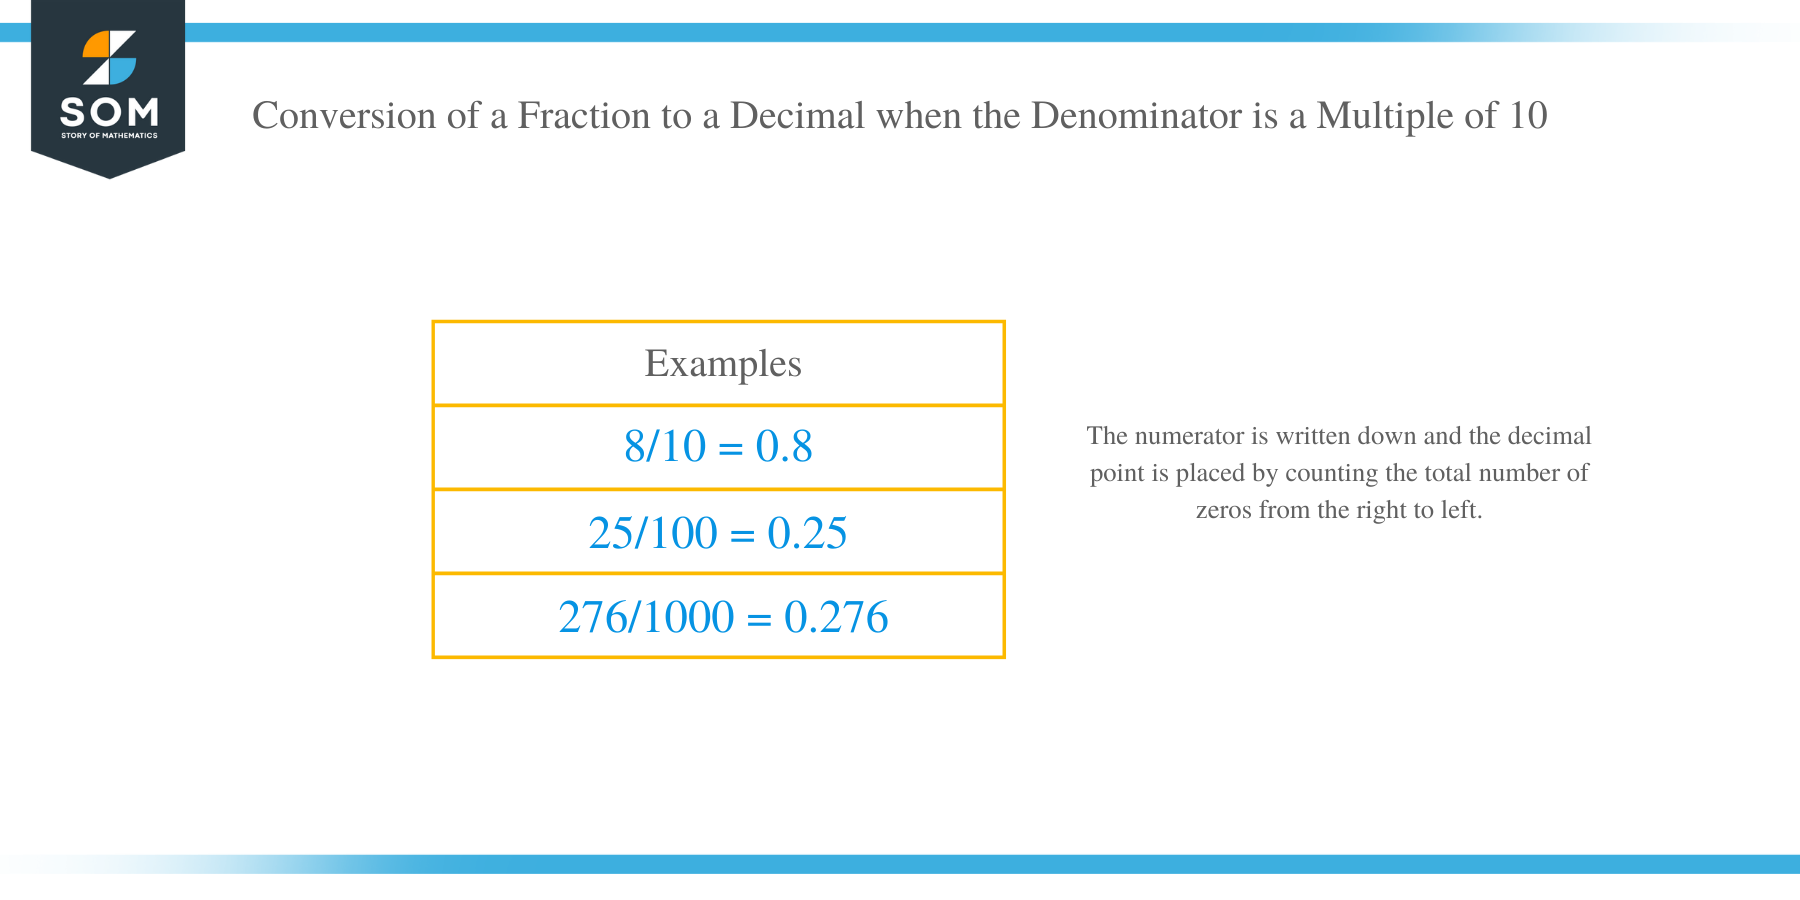 Conversion of a Fraction to a Decimal Number When the Denominator Is a Multiple of 10